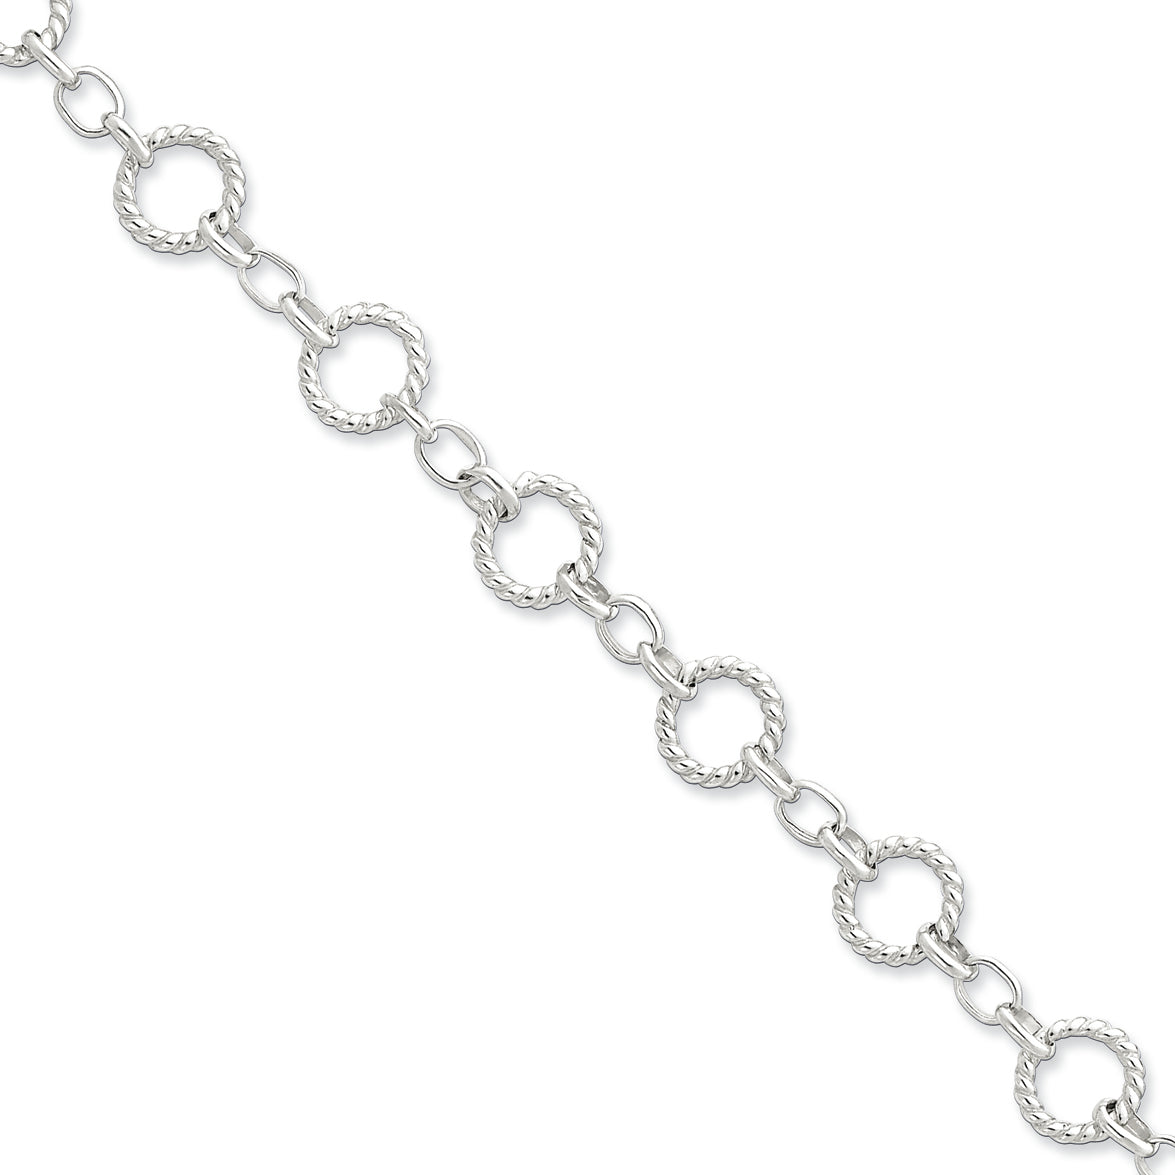 Sterling Silver Twist Circle Link Bracelet 7.25 Inches